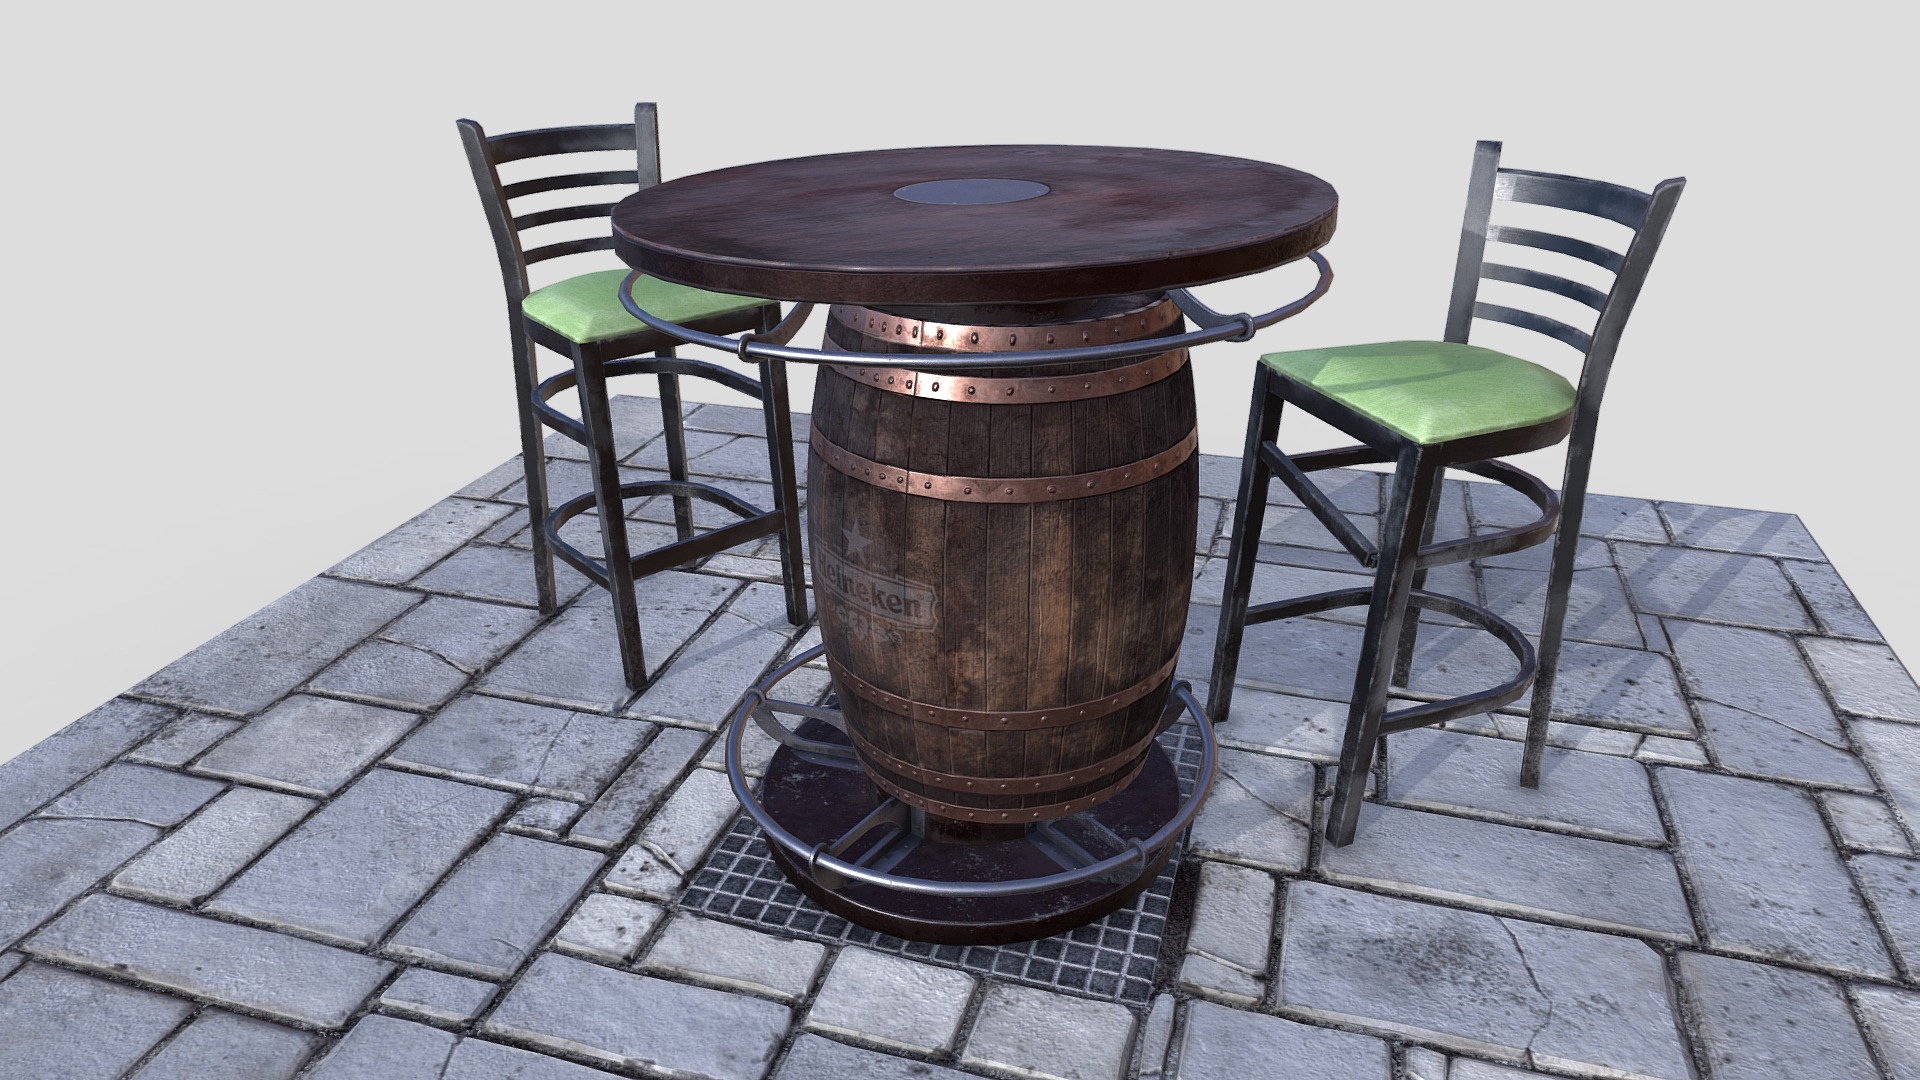 3D model Wood Barrel Table and Chairs/ PBR Textures - This is a 3D model of the Wood Barrel Table and Chairs/ PBR Textures. The 3D model is about a drum set and chairs.